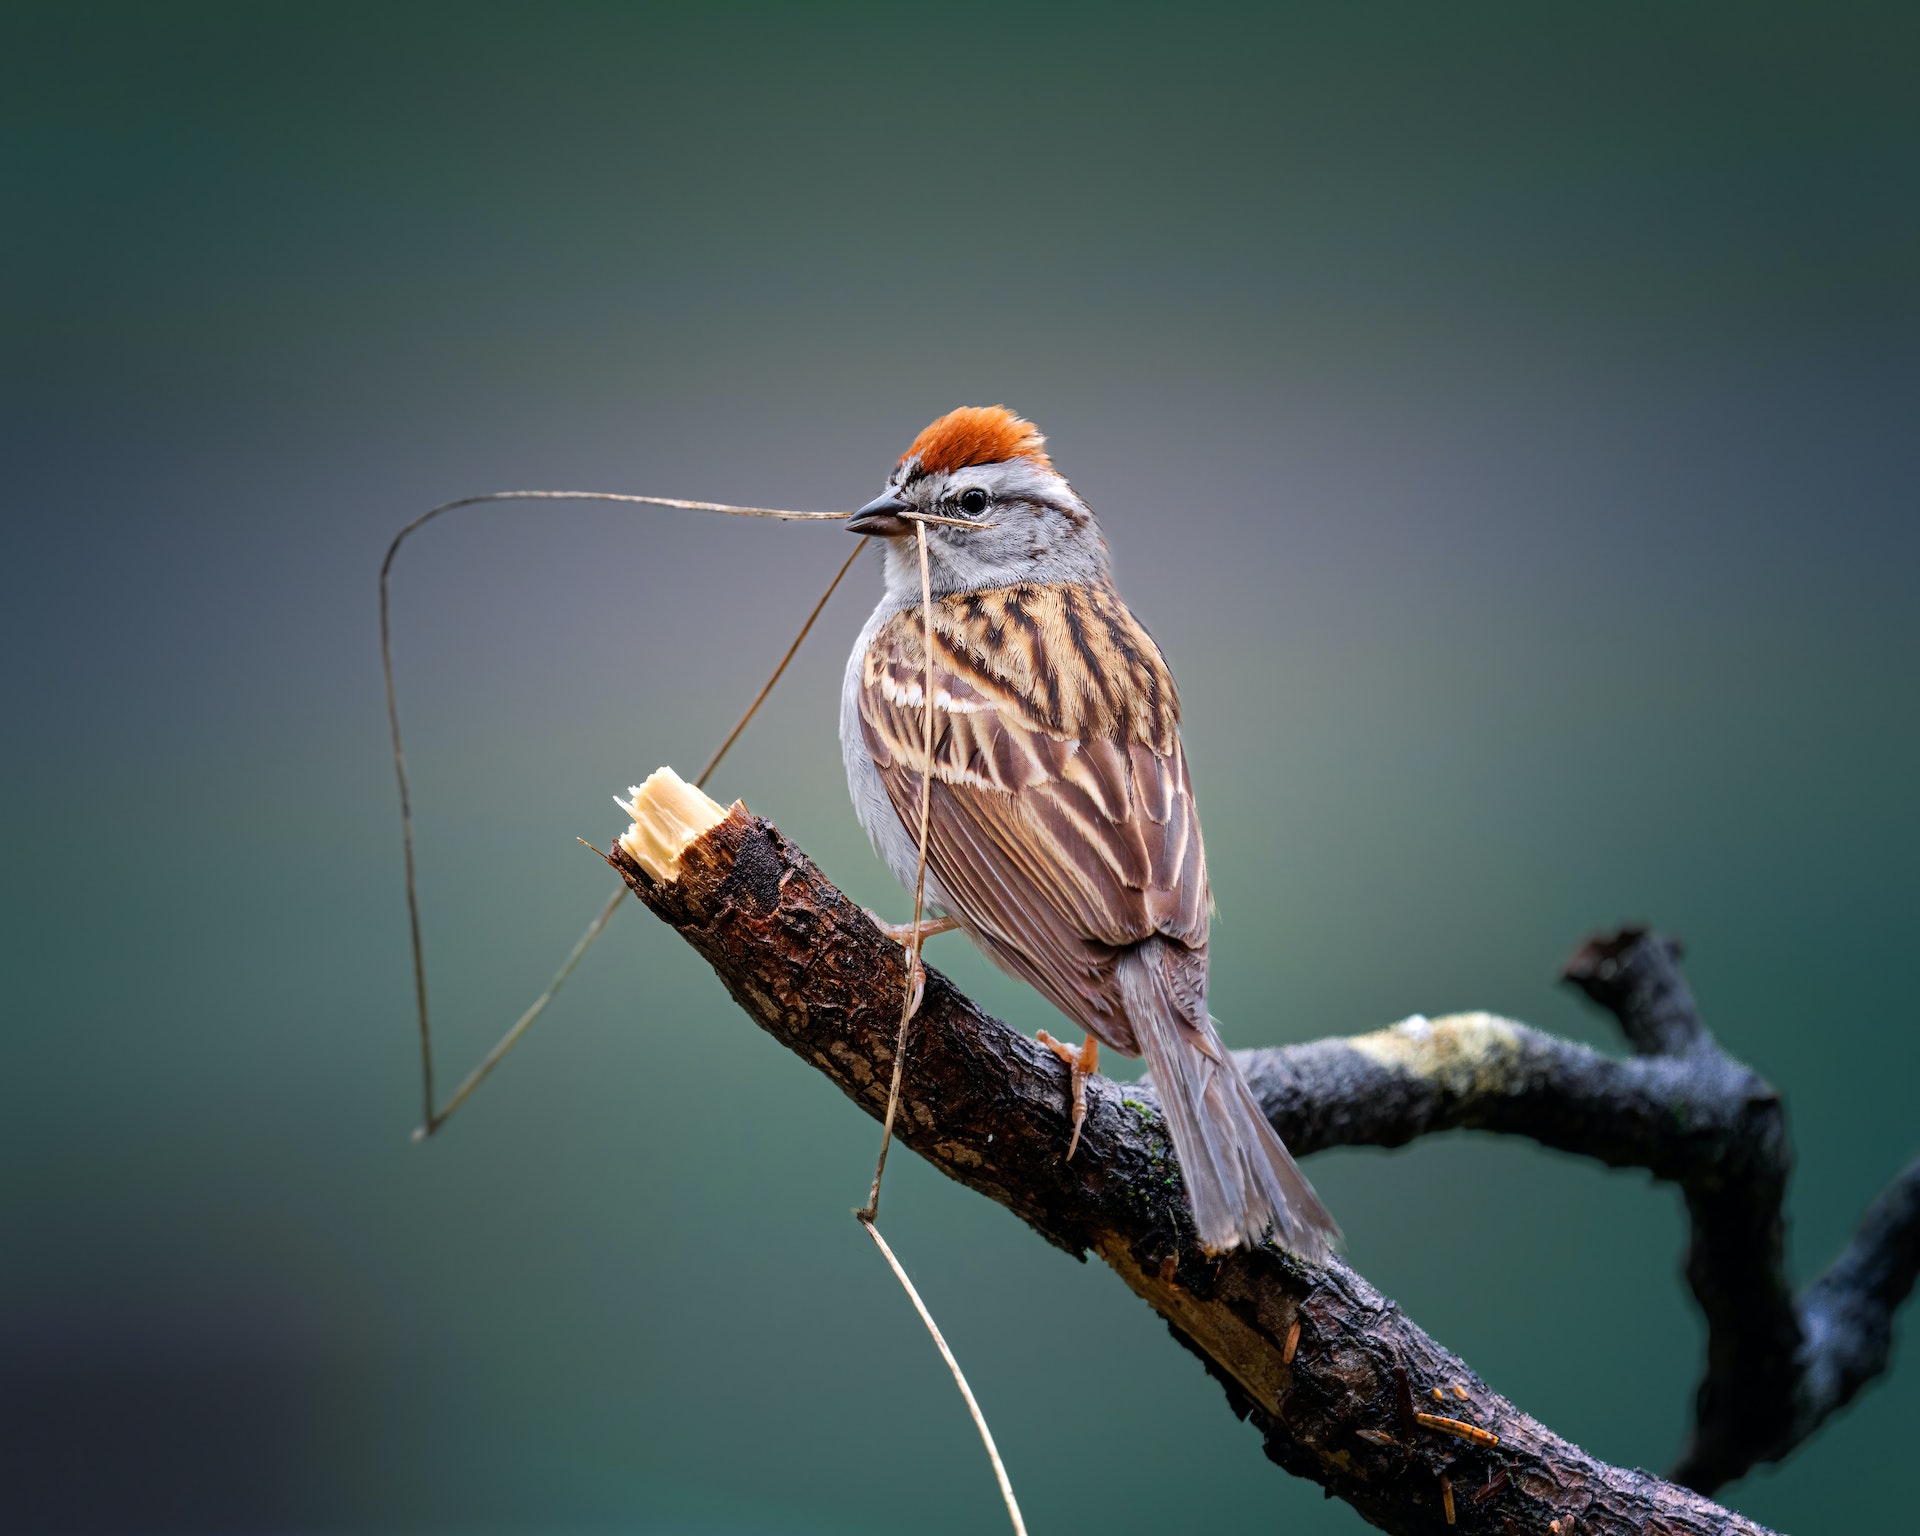 Chipping Sparrow on a branch holding a twig (migratory birds)